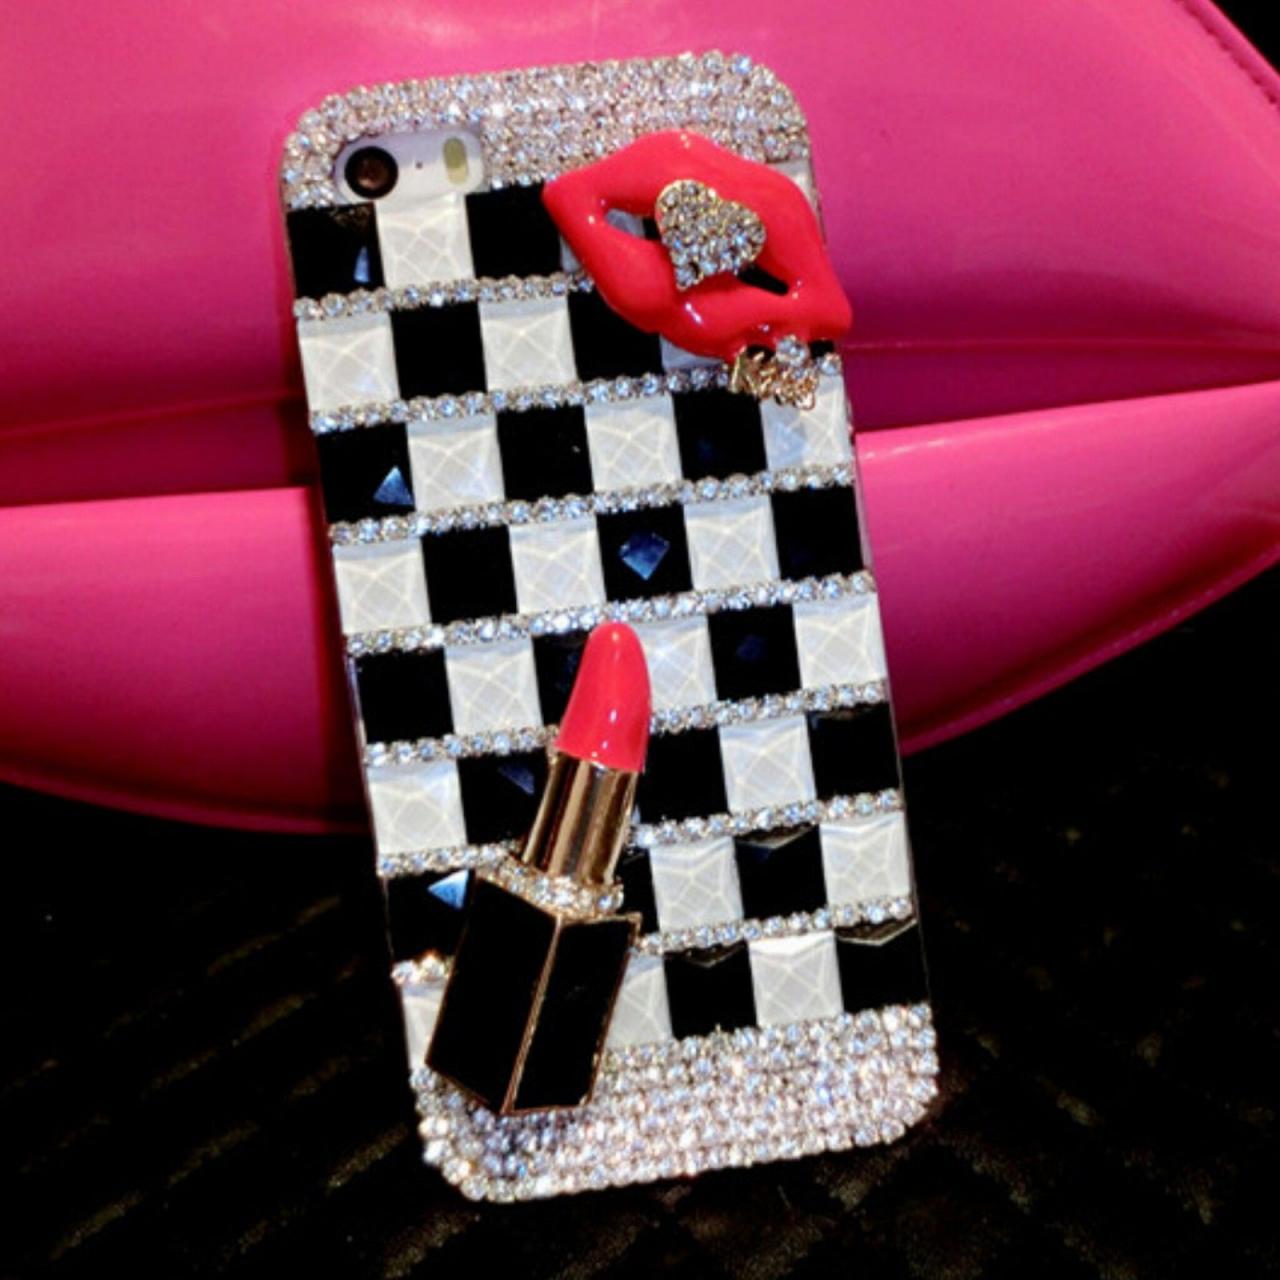 Mouth Bling Iphone 7 Plus, Iphone 6 6s Case, Iphone 6 6s Plus Case, Iphone 5s Se Case, Iphone 5c Case, Bling Wallet Case For Samsung Galaxy Note